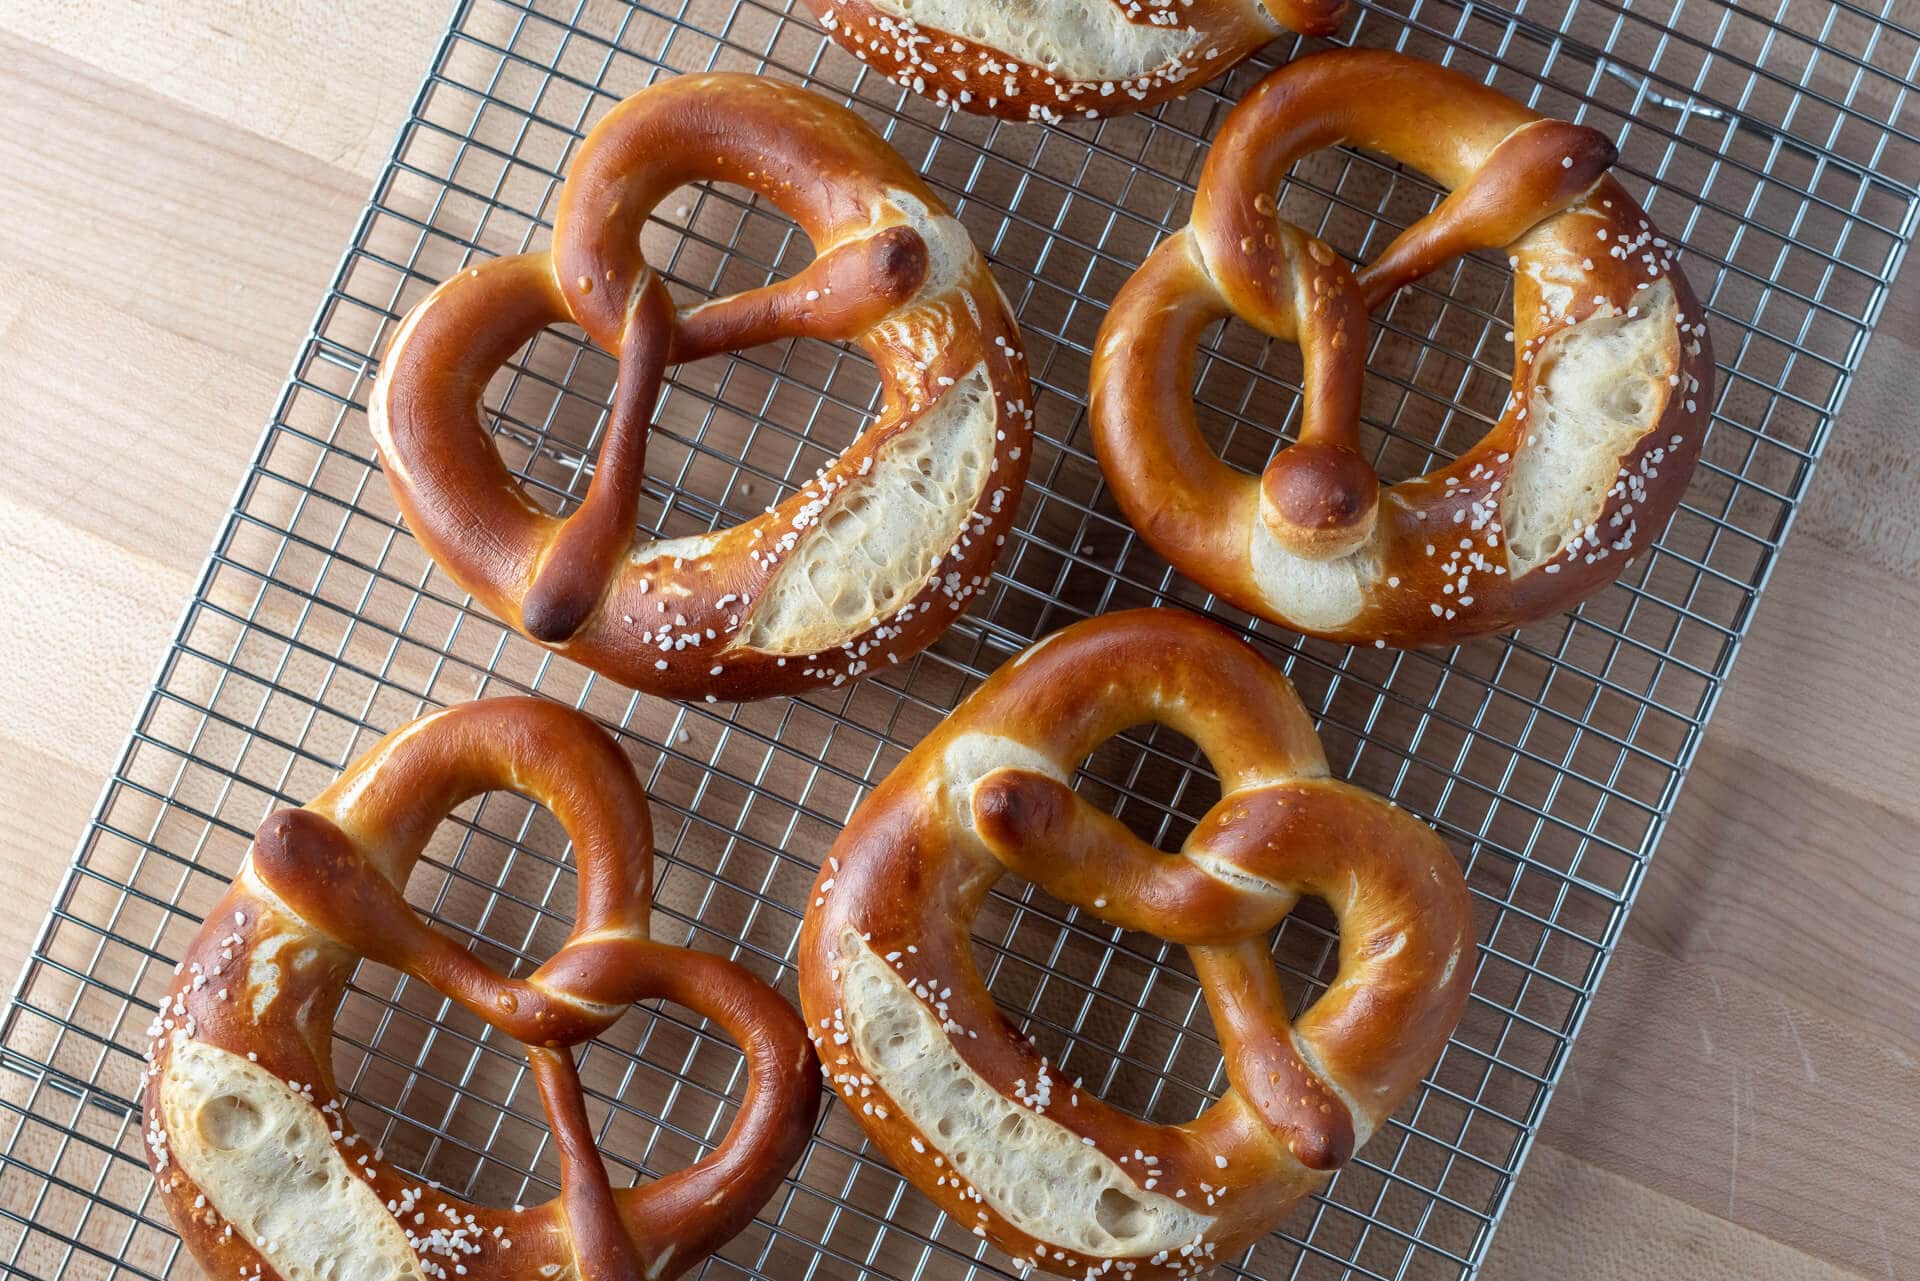 I made some sourdough pretzels for the first time ever and experimented  with different browning techniques